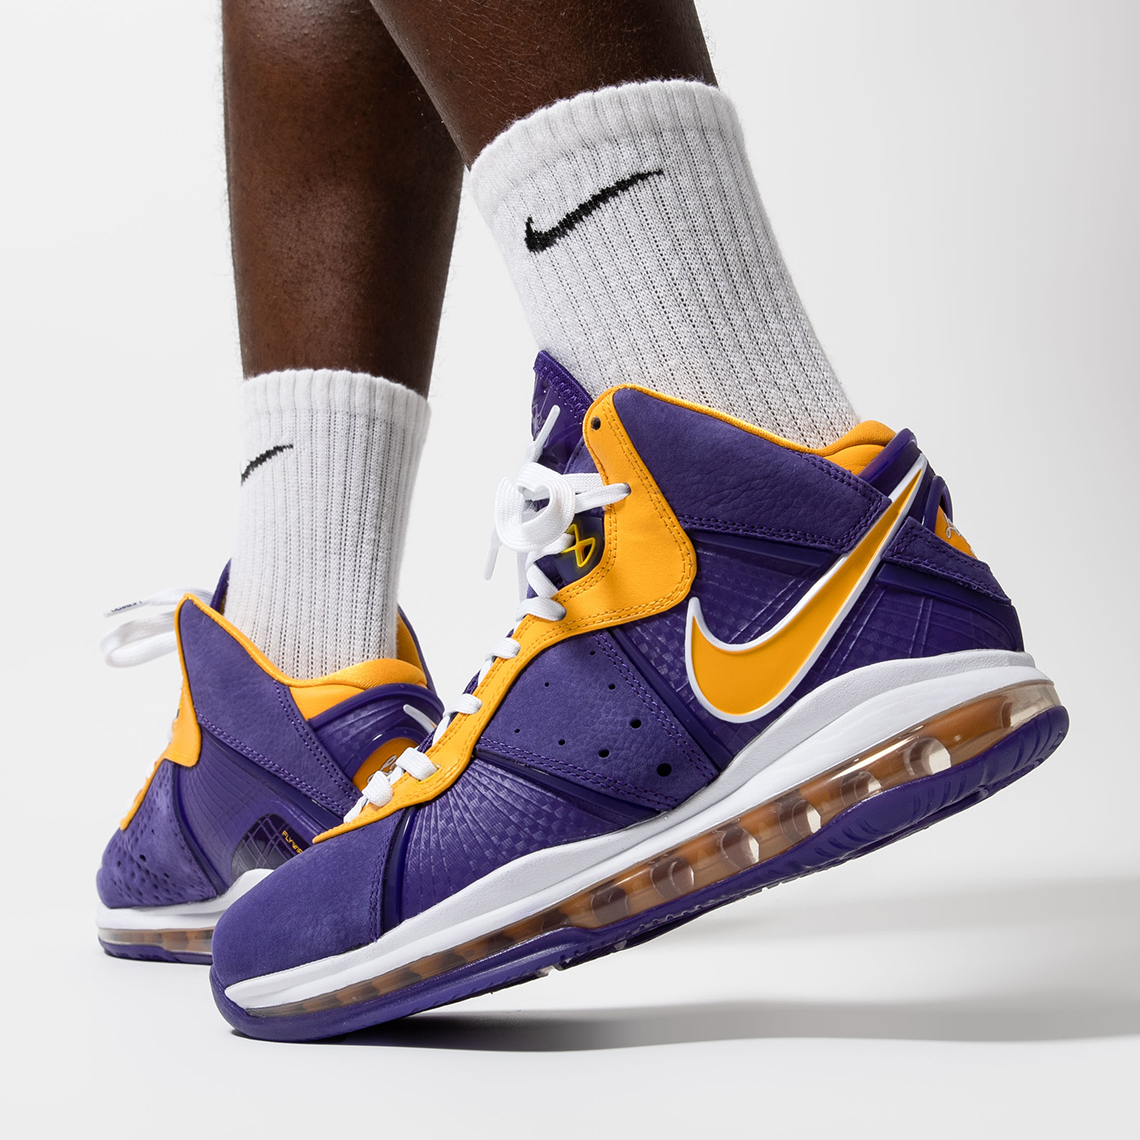 Lebron 8 Lakers Release Date 2